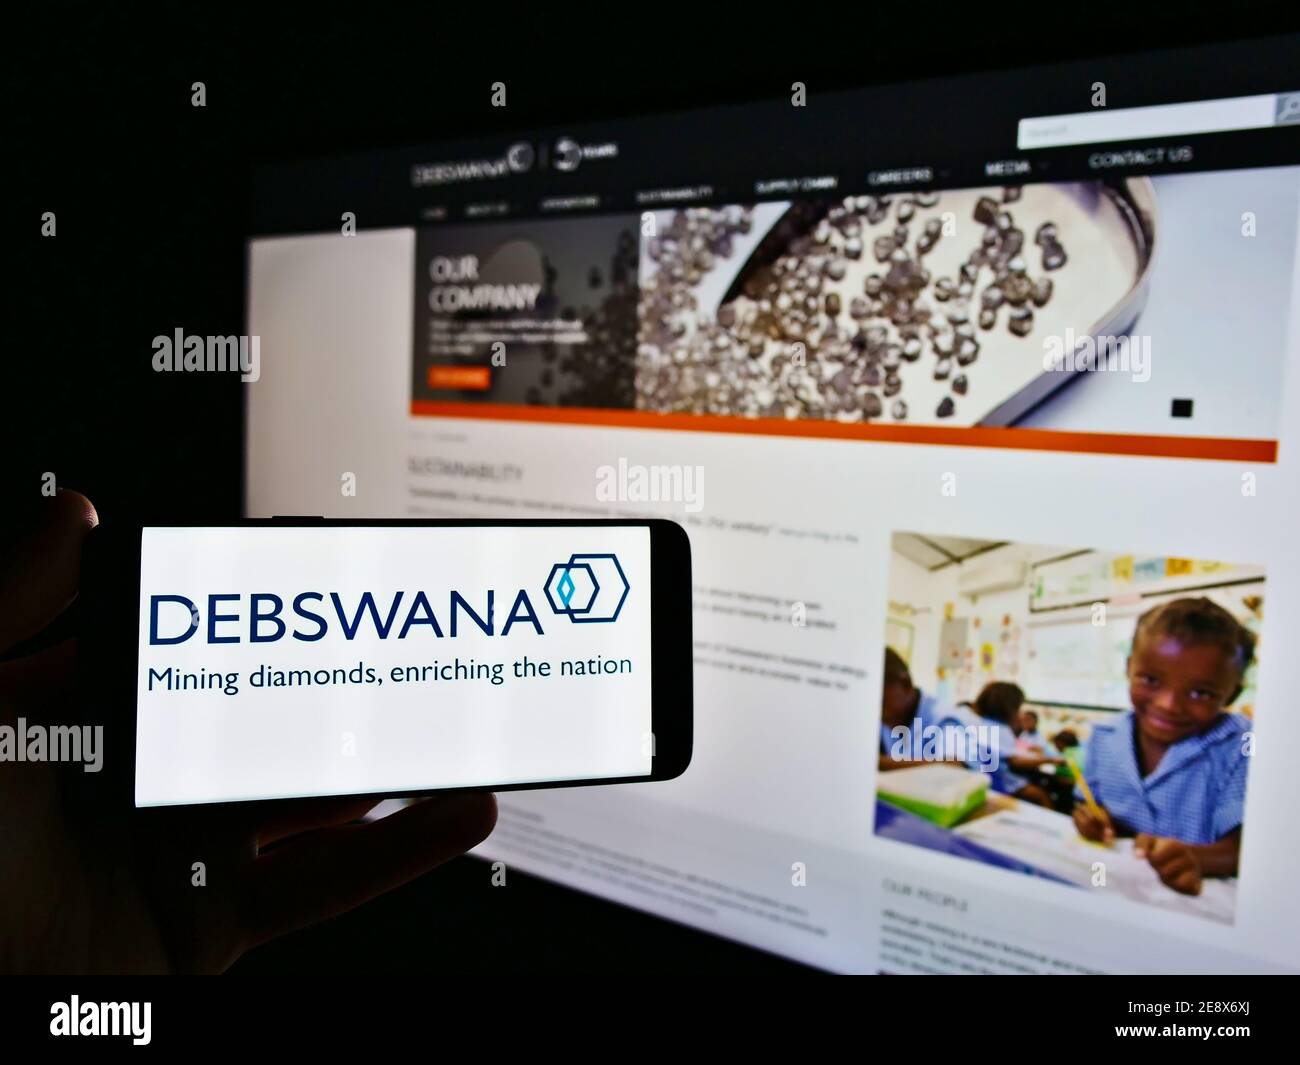 Person holding mobile phone with logo of mining company Debswana Diamond Company Limited on display in front of web page. Focus on phone screen. Stock Photo